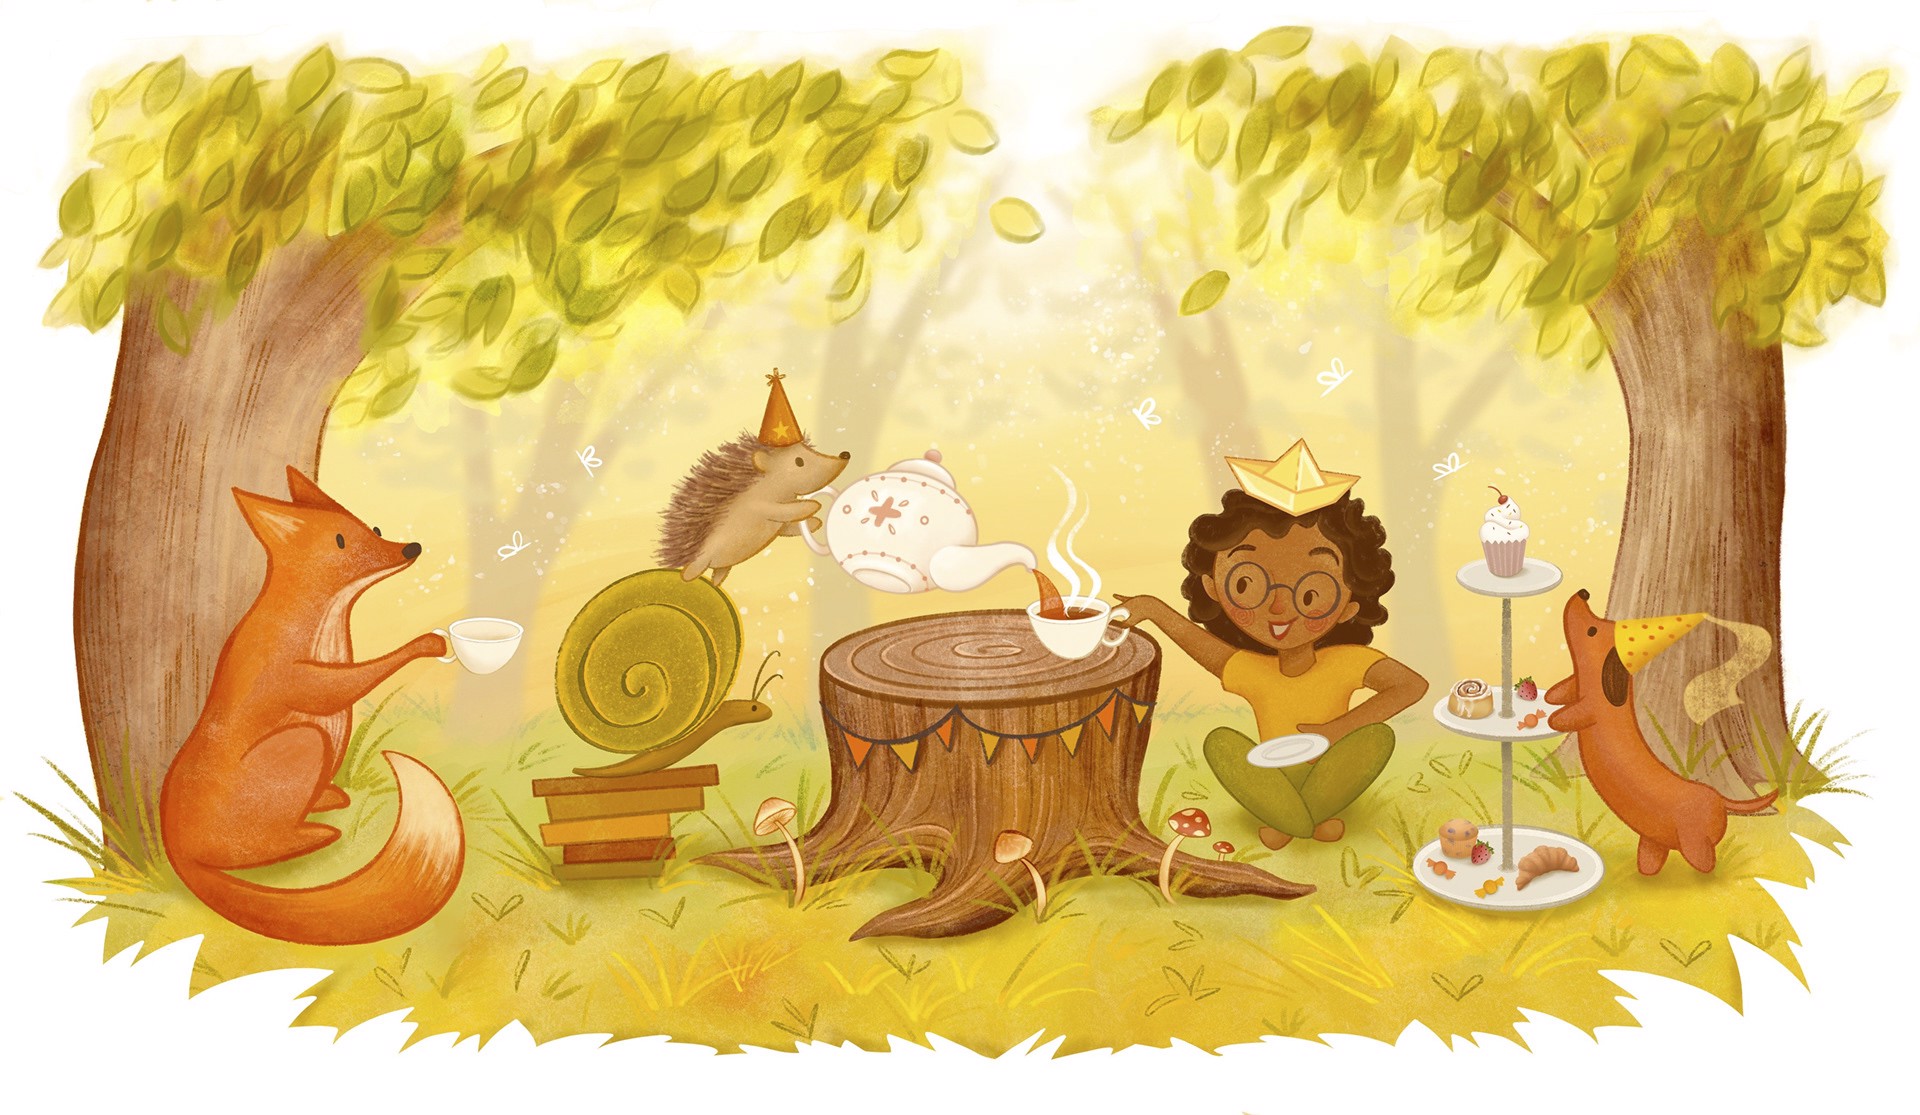 Google Doodle for National Children's Day by Adrienne Krozack